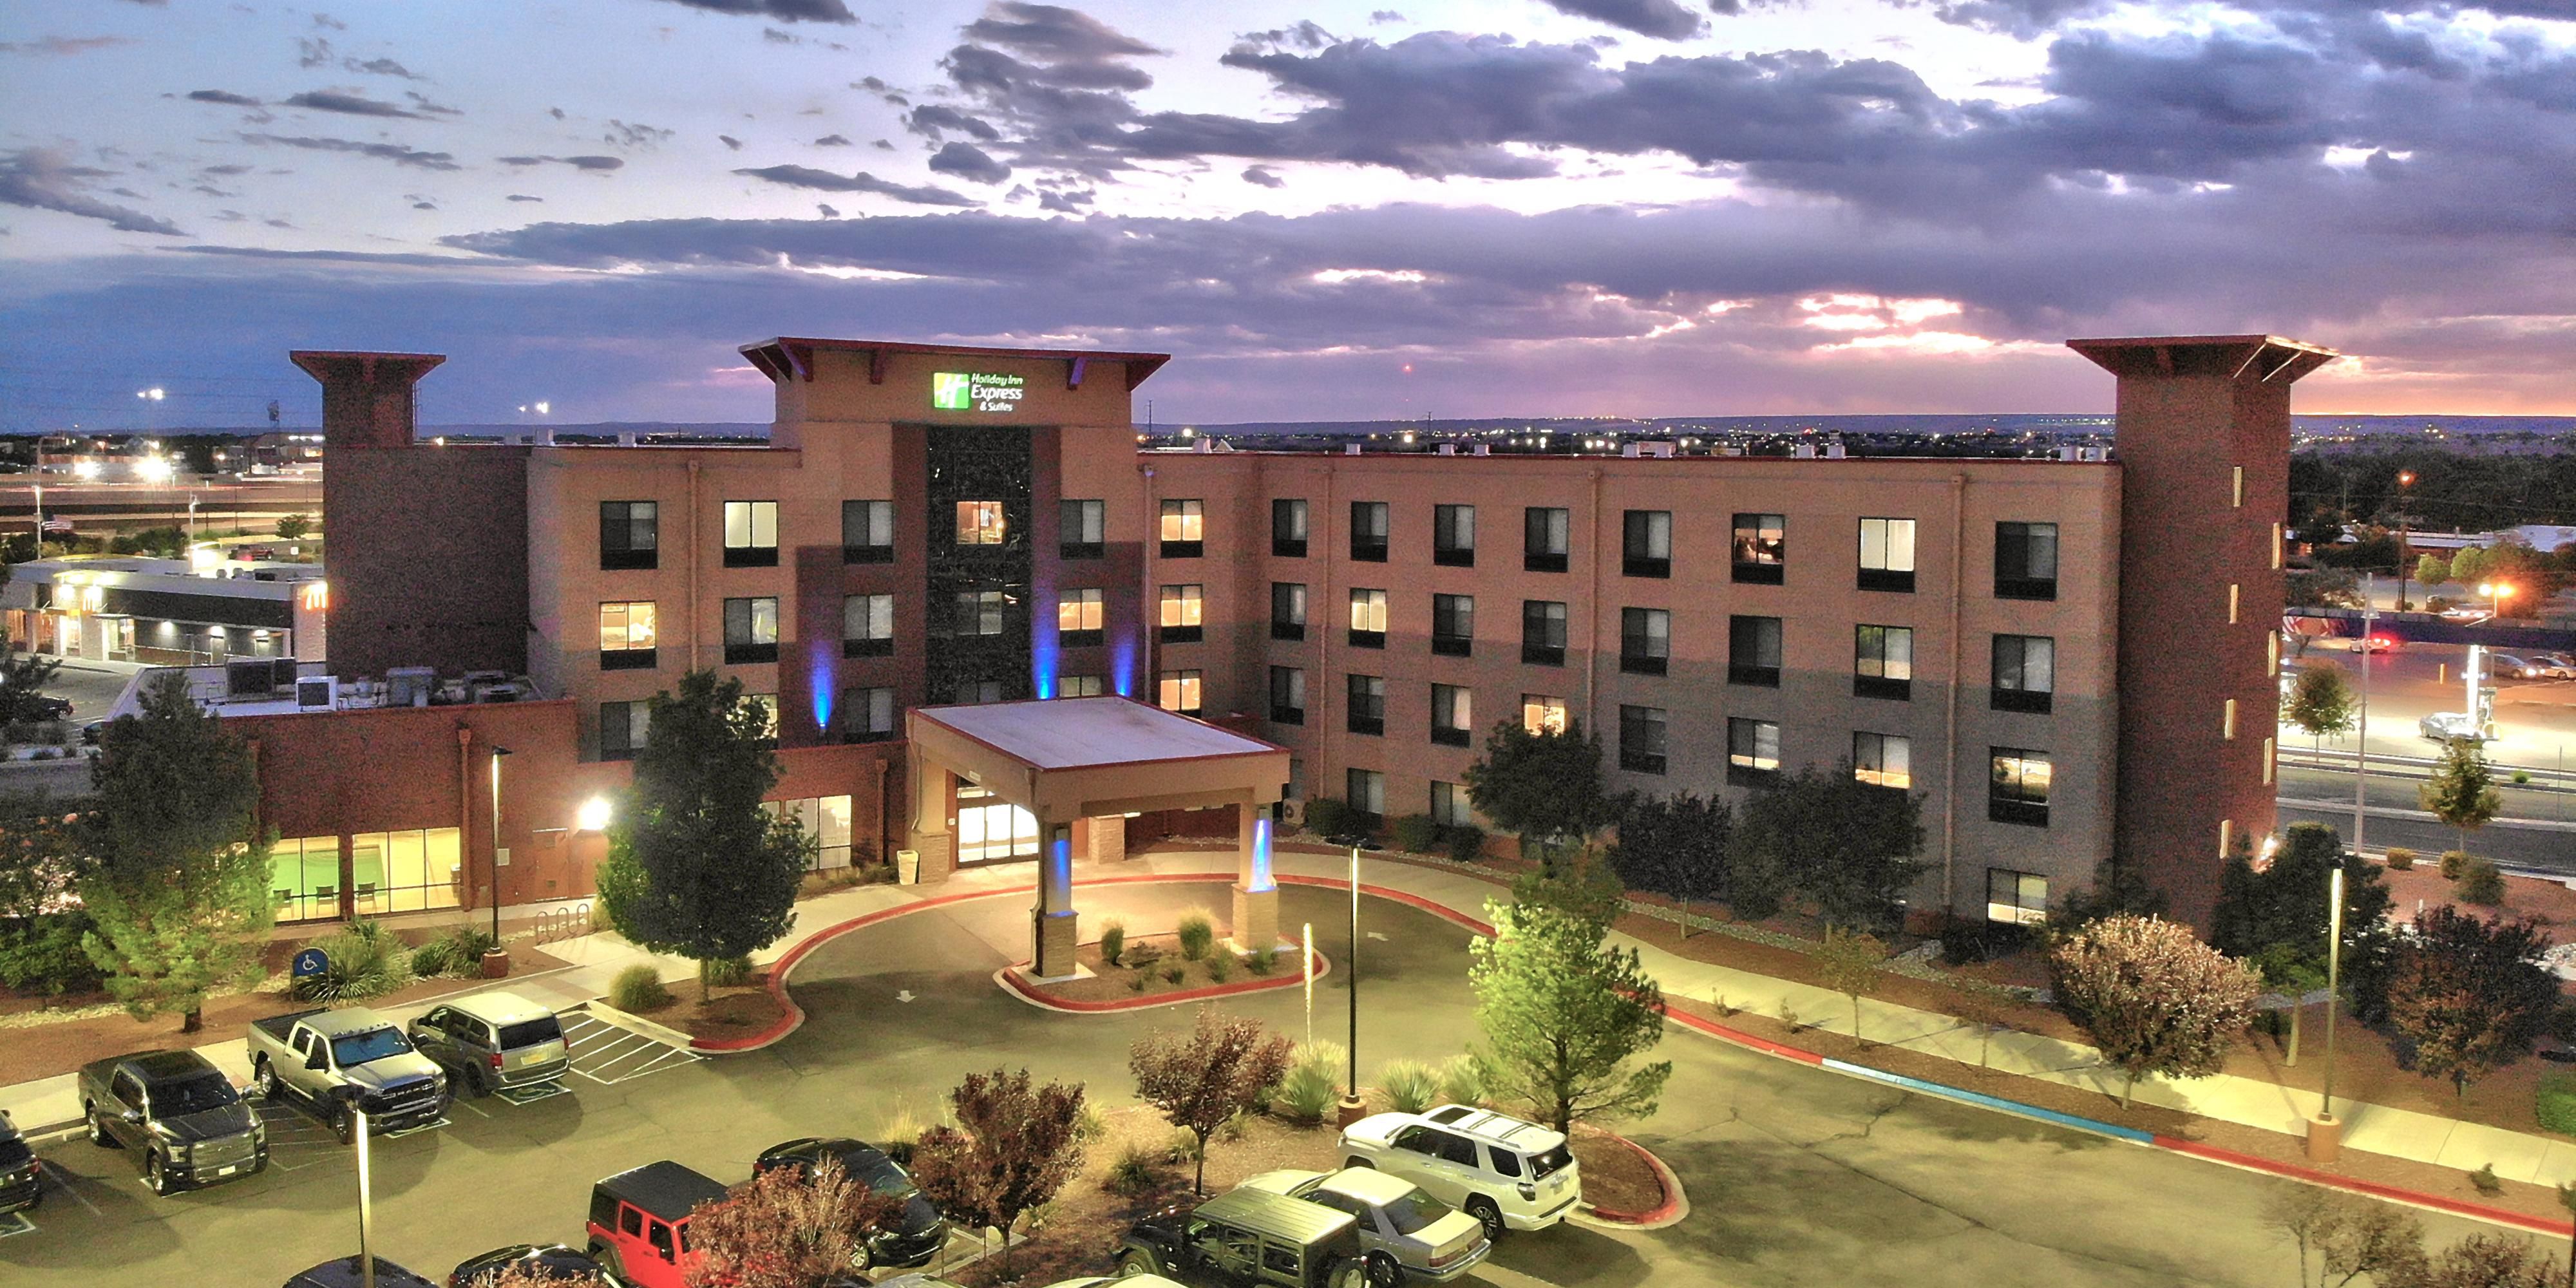 As a Native American owned business, our hotel aligns with the Pueblo core value of hospitality & the Indian Pueblo Cultural Center’s mission of serving as a gathering place where Pueblo culture is celebrated through creative & cultural experiences, while providing economic opportunities to Pueblo & local communities.